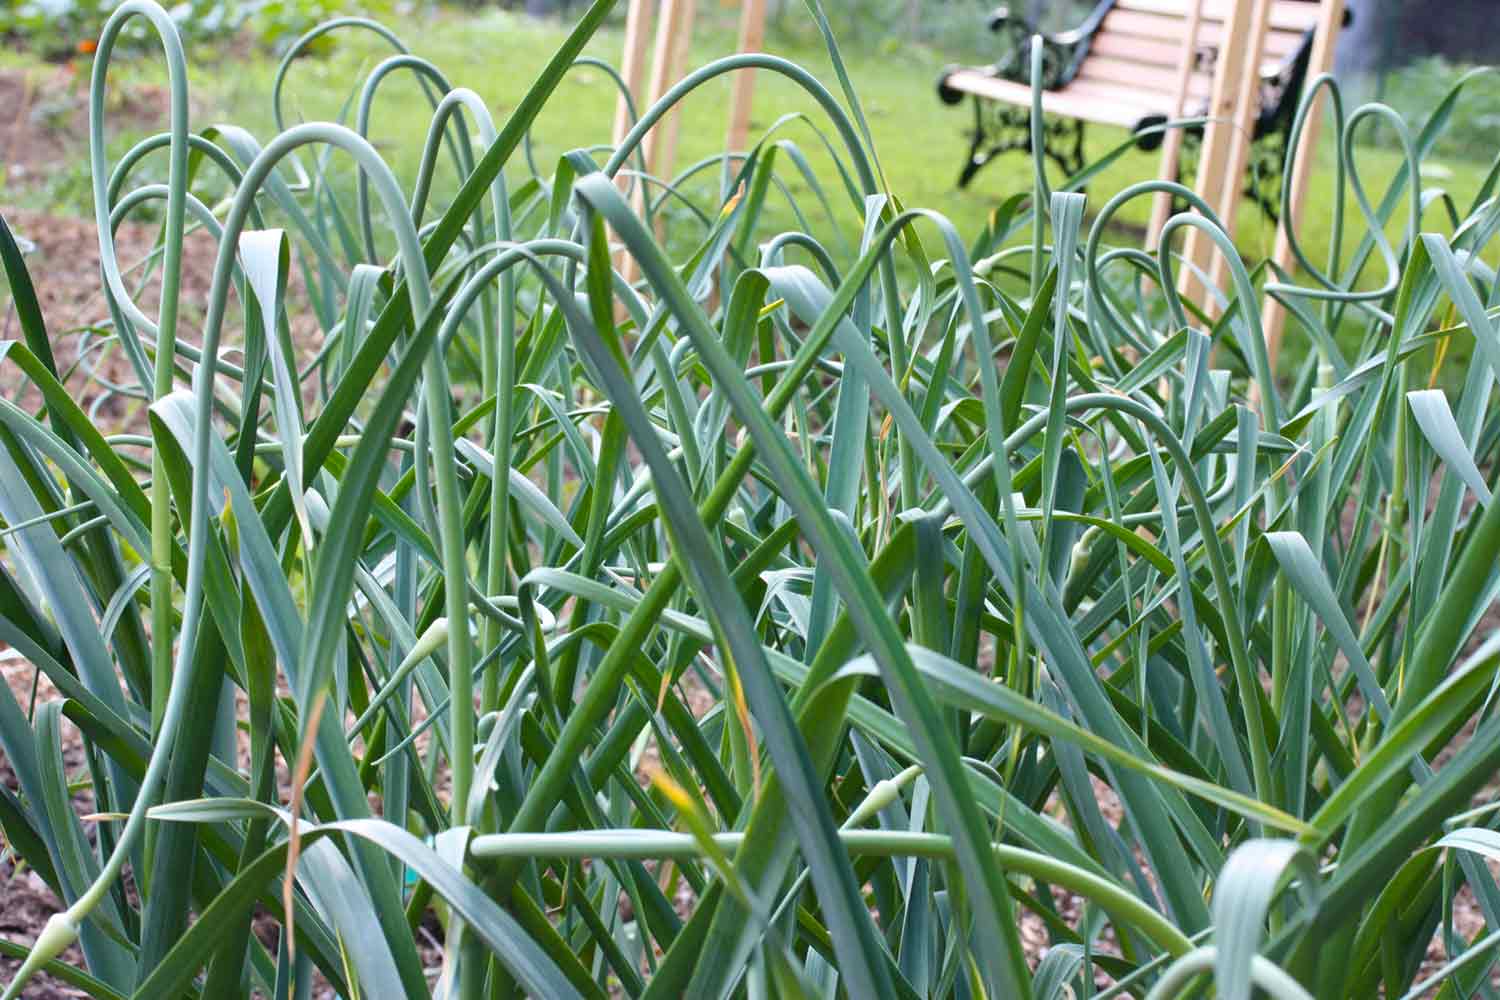 Garlic garden with garlic scapes bent. up and over.